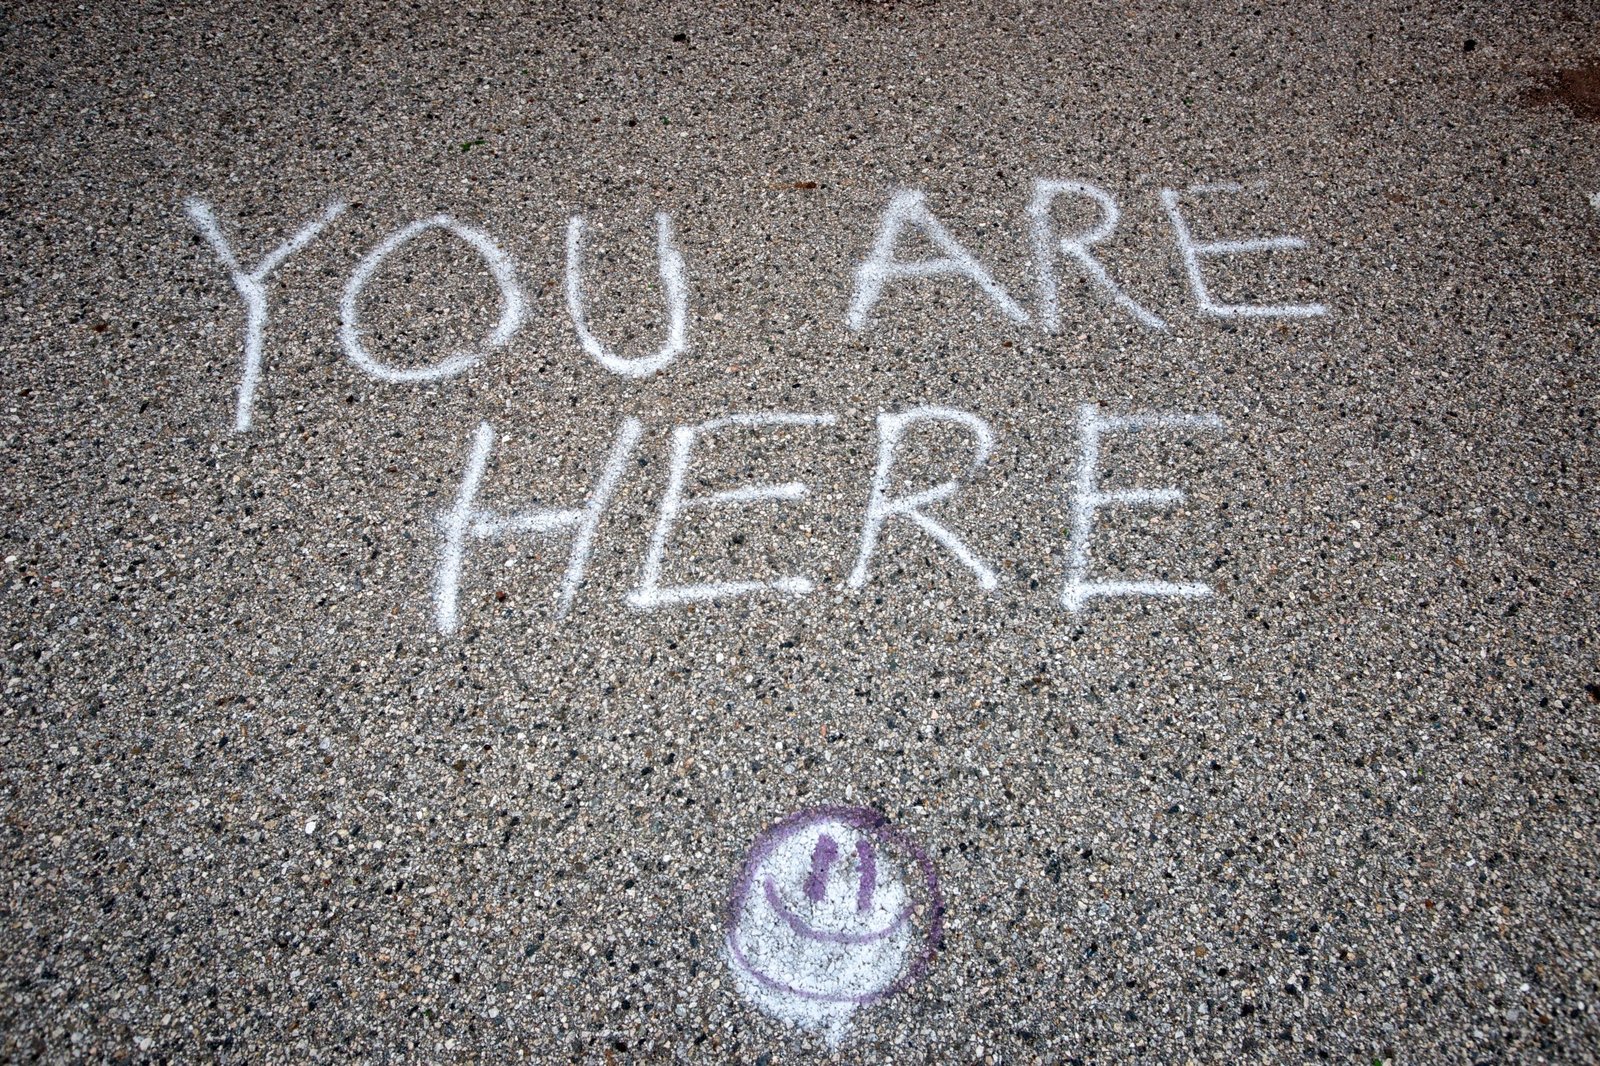 Today, you are here.